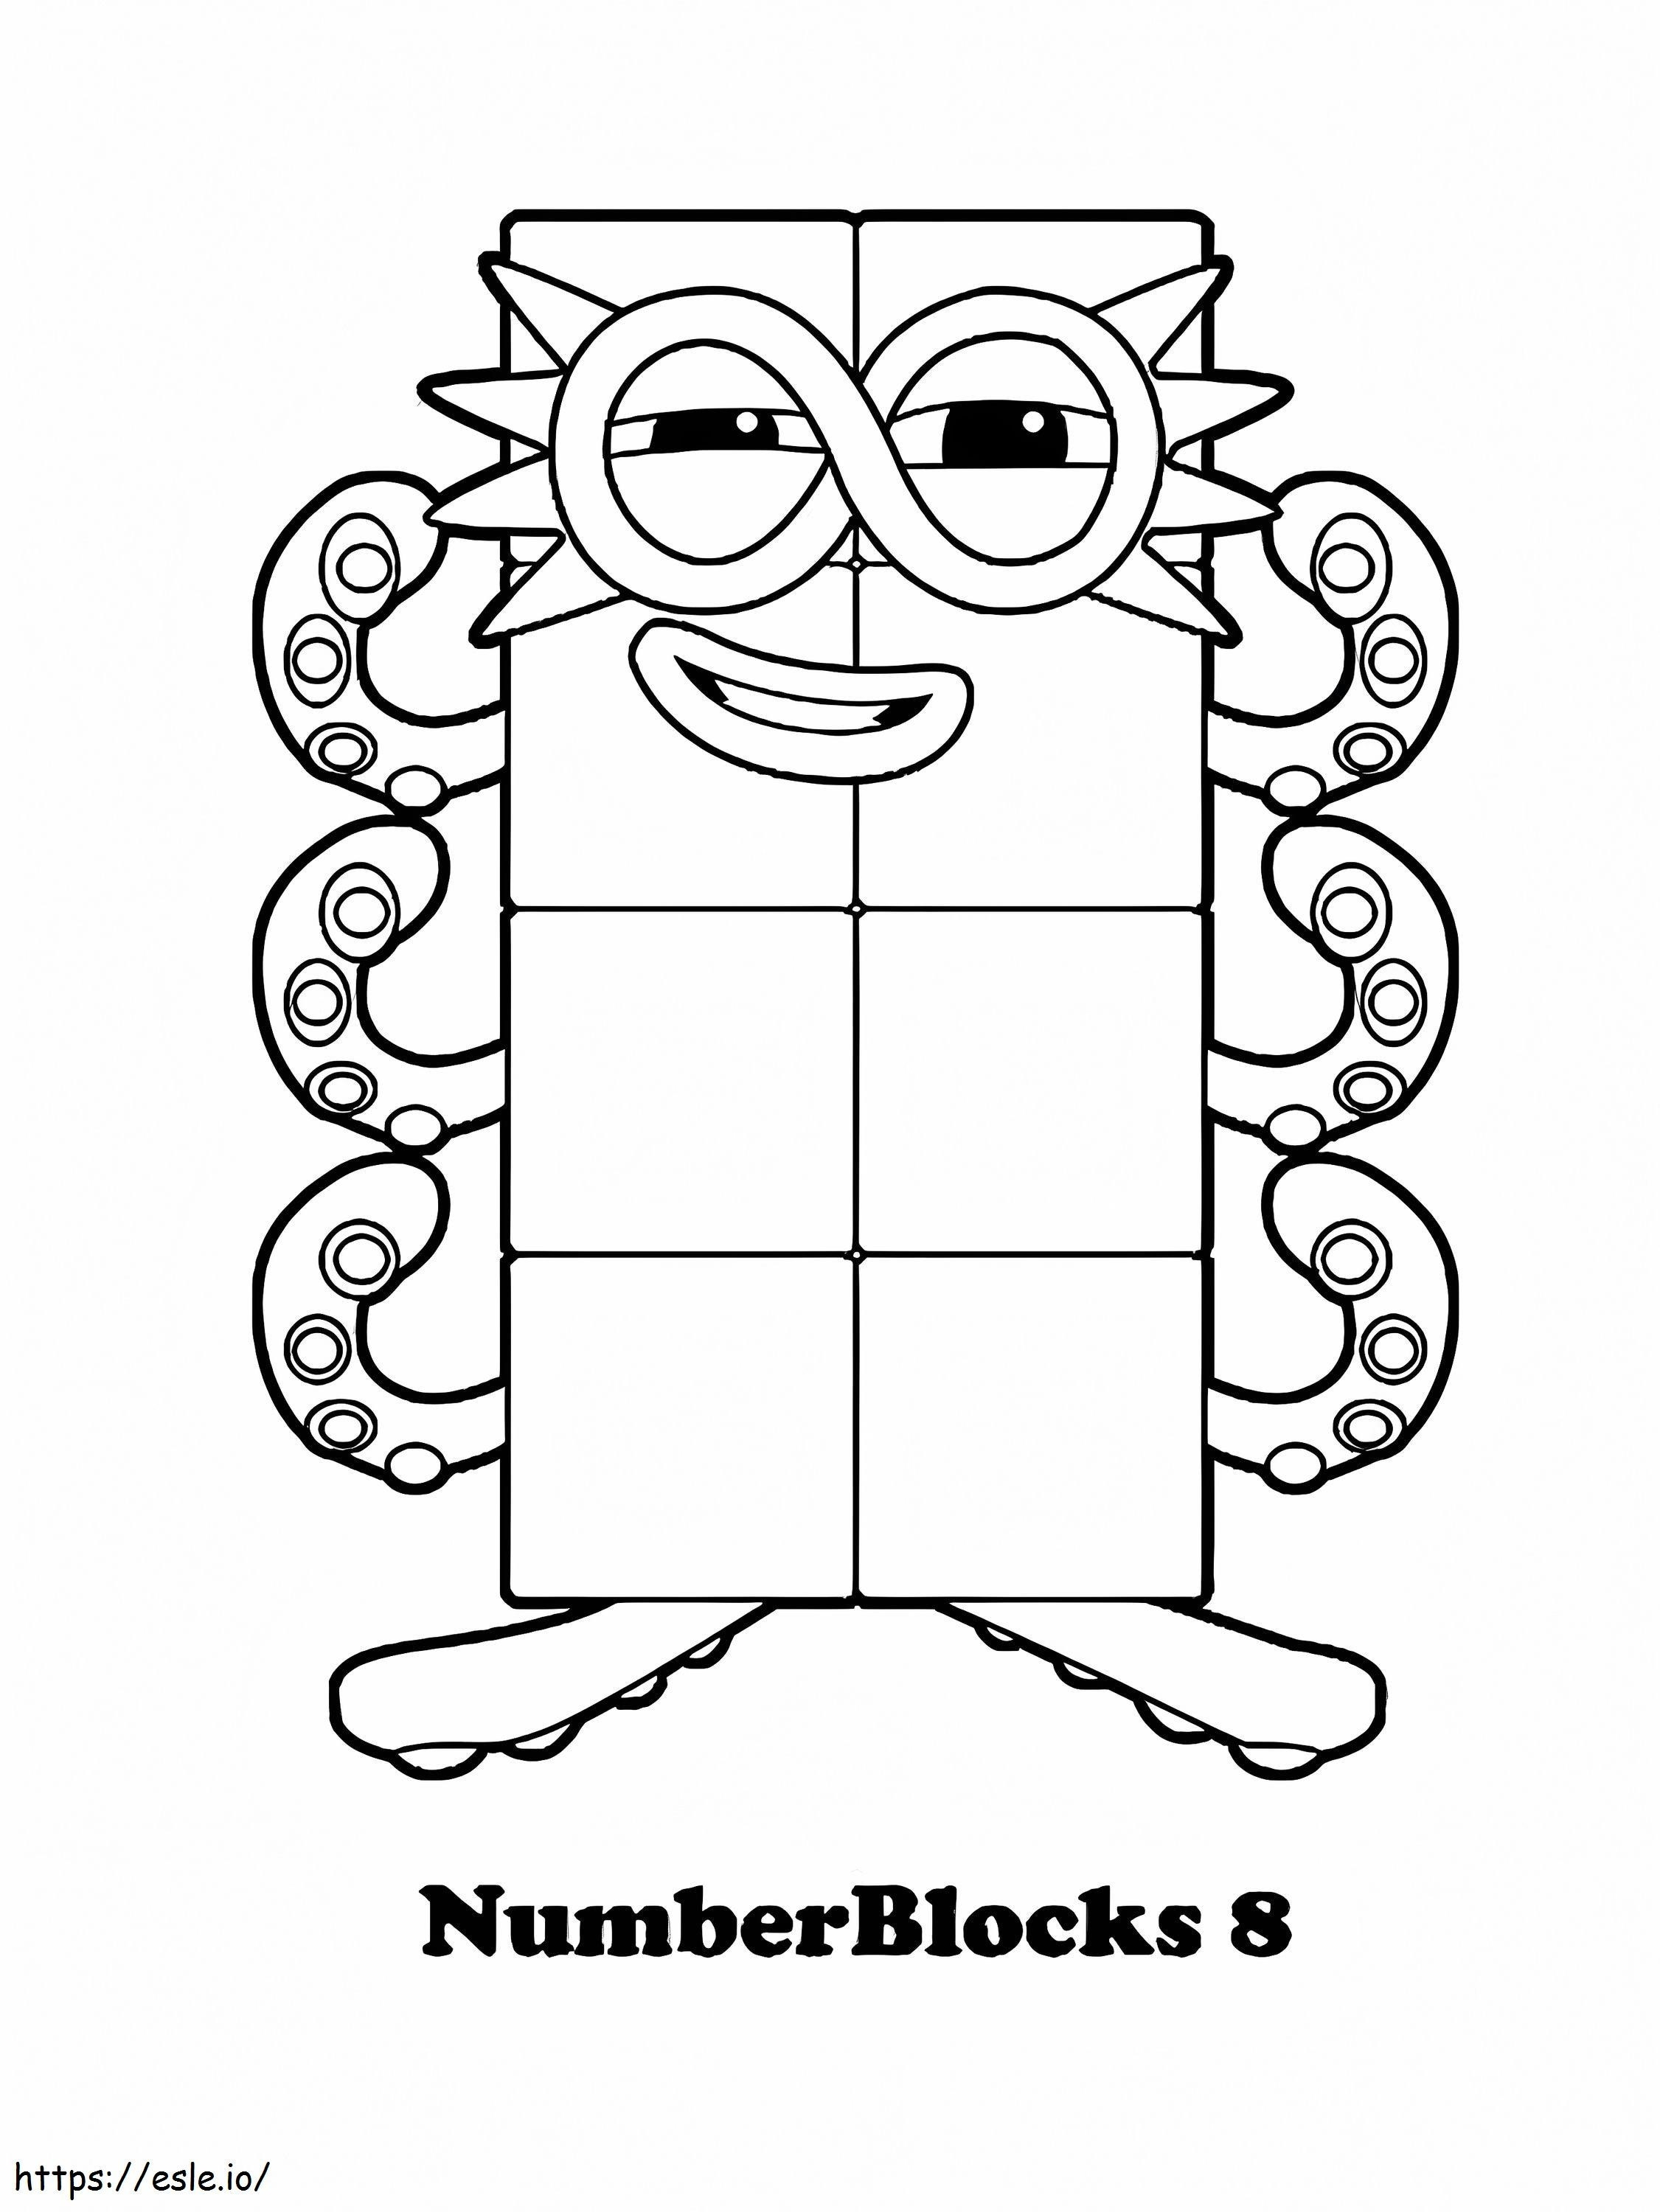 1584755994 D77F9Ded6Ab02D99526177 coloring page